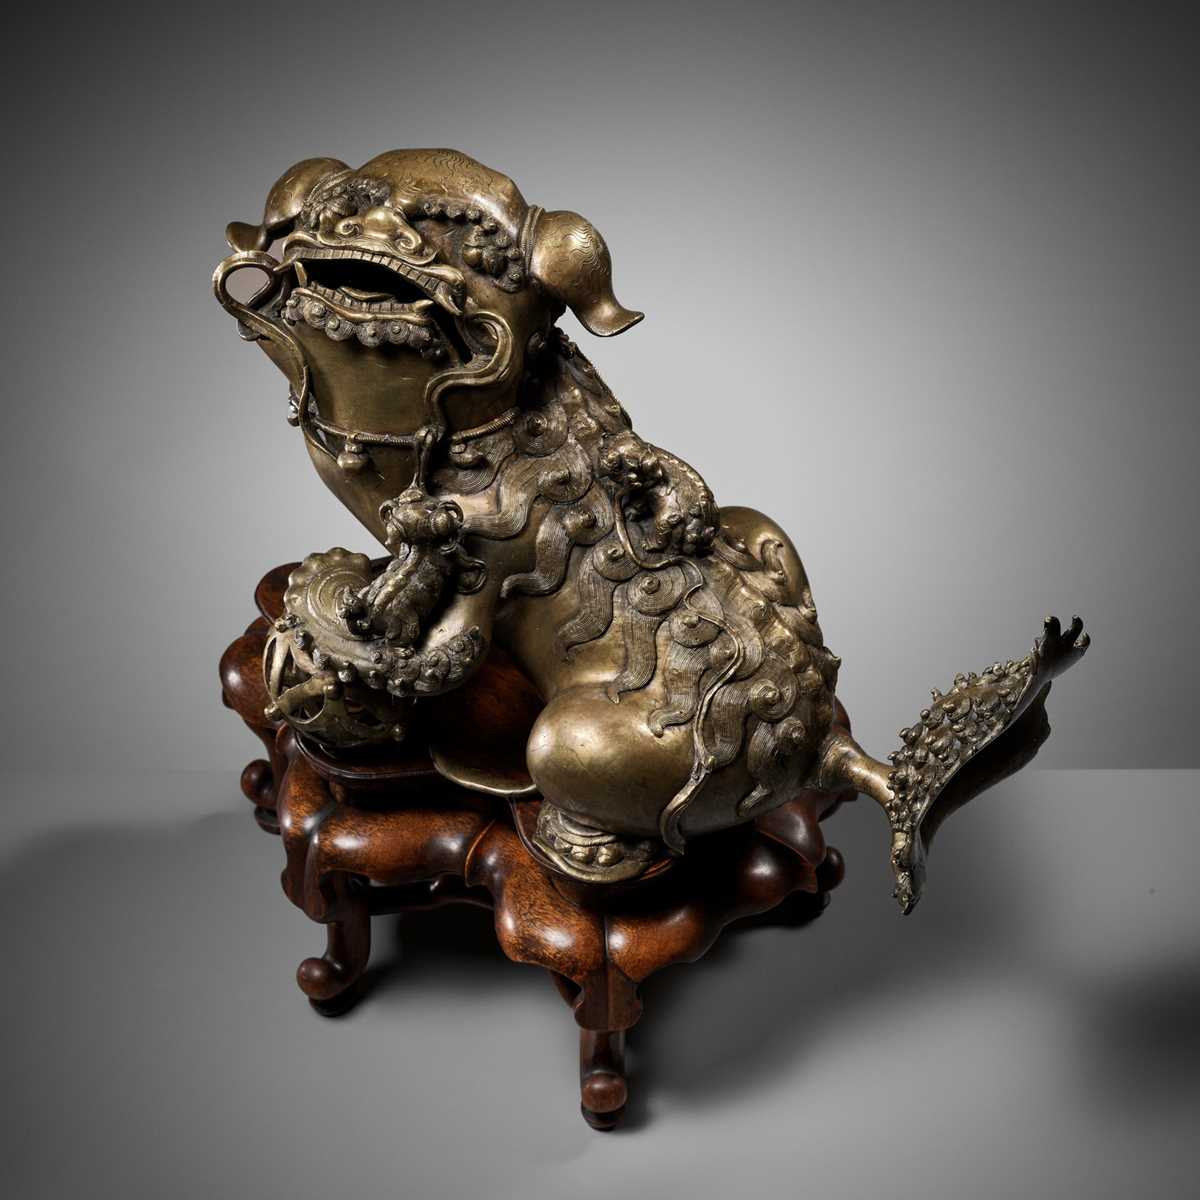 Lot 36 - A MASSIVE AND VERY LARGE ‘BUDDHIST LION’ BRONZE CENSER, 17TH-18TH CENTURY